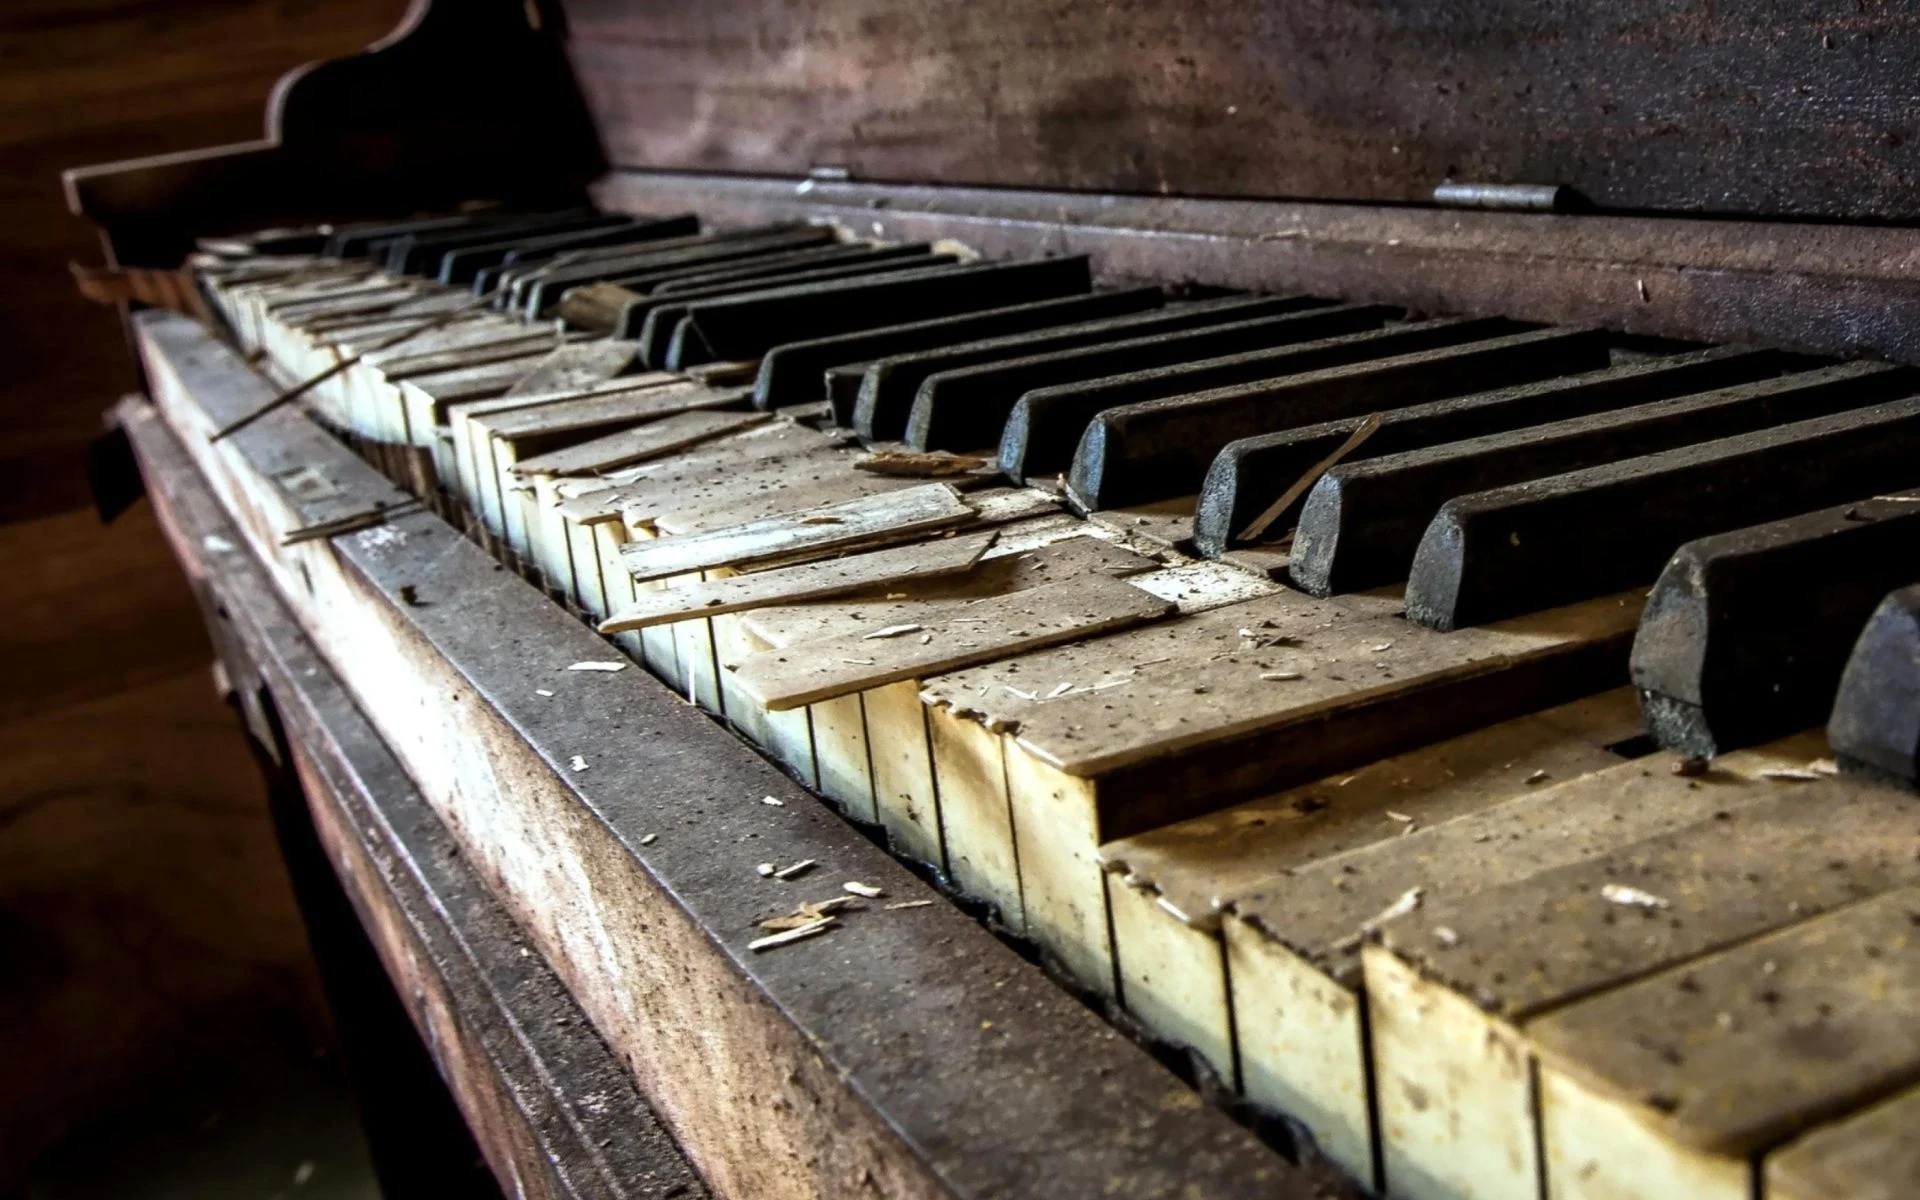 Piano: Keyboards And A Pedal Clavier, Operated By The Player’s Hands And Feet. 1920x1200 HD Wallpaper.